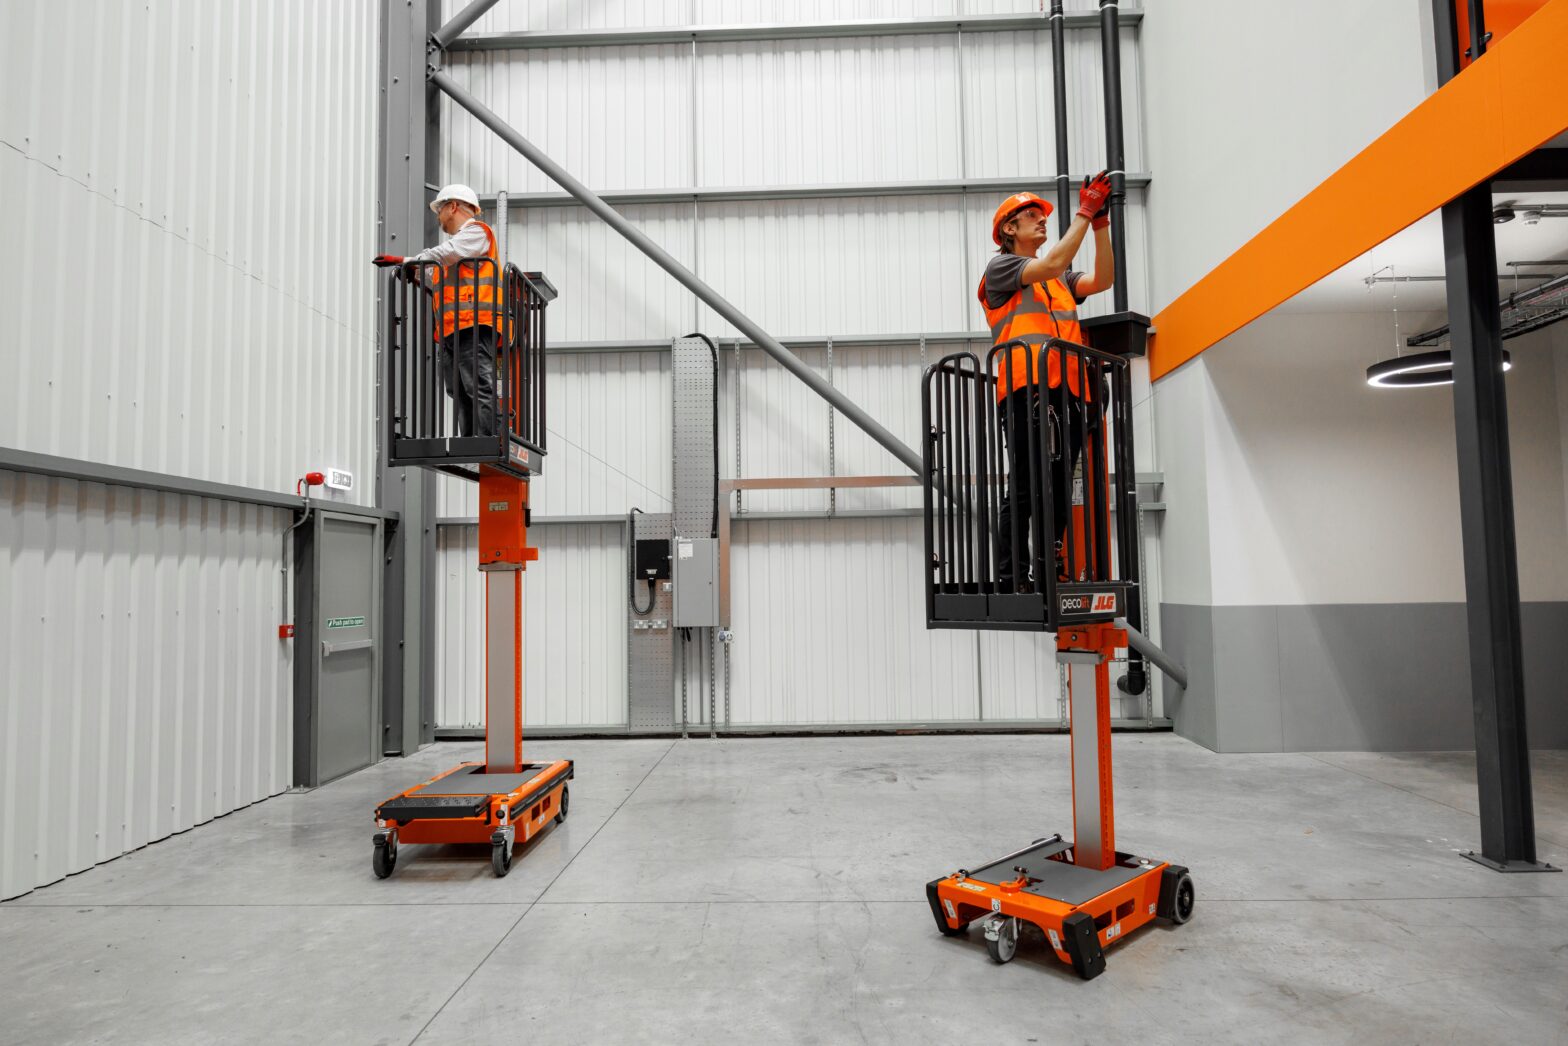 Pecolift and Ecolift manual lifting equipment in a warehouse